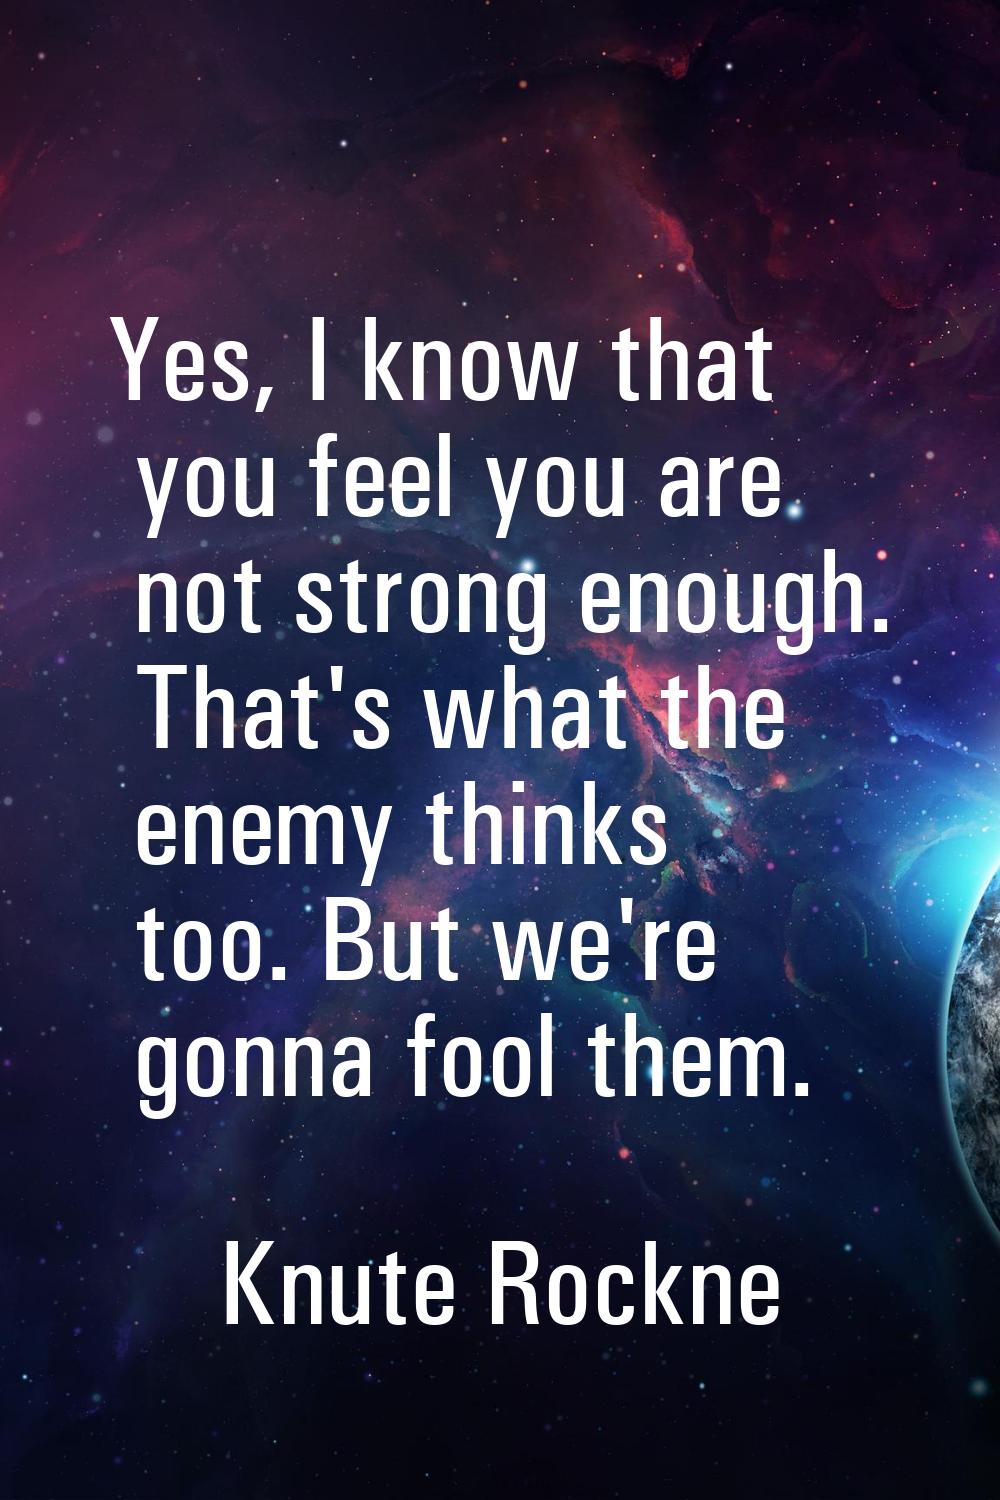 Yes, I know that you feel you are not strong enough. That's what the enemy thinks too. But we're go